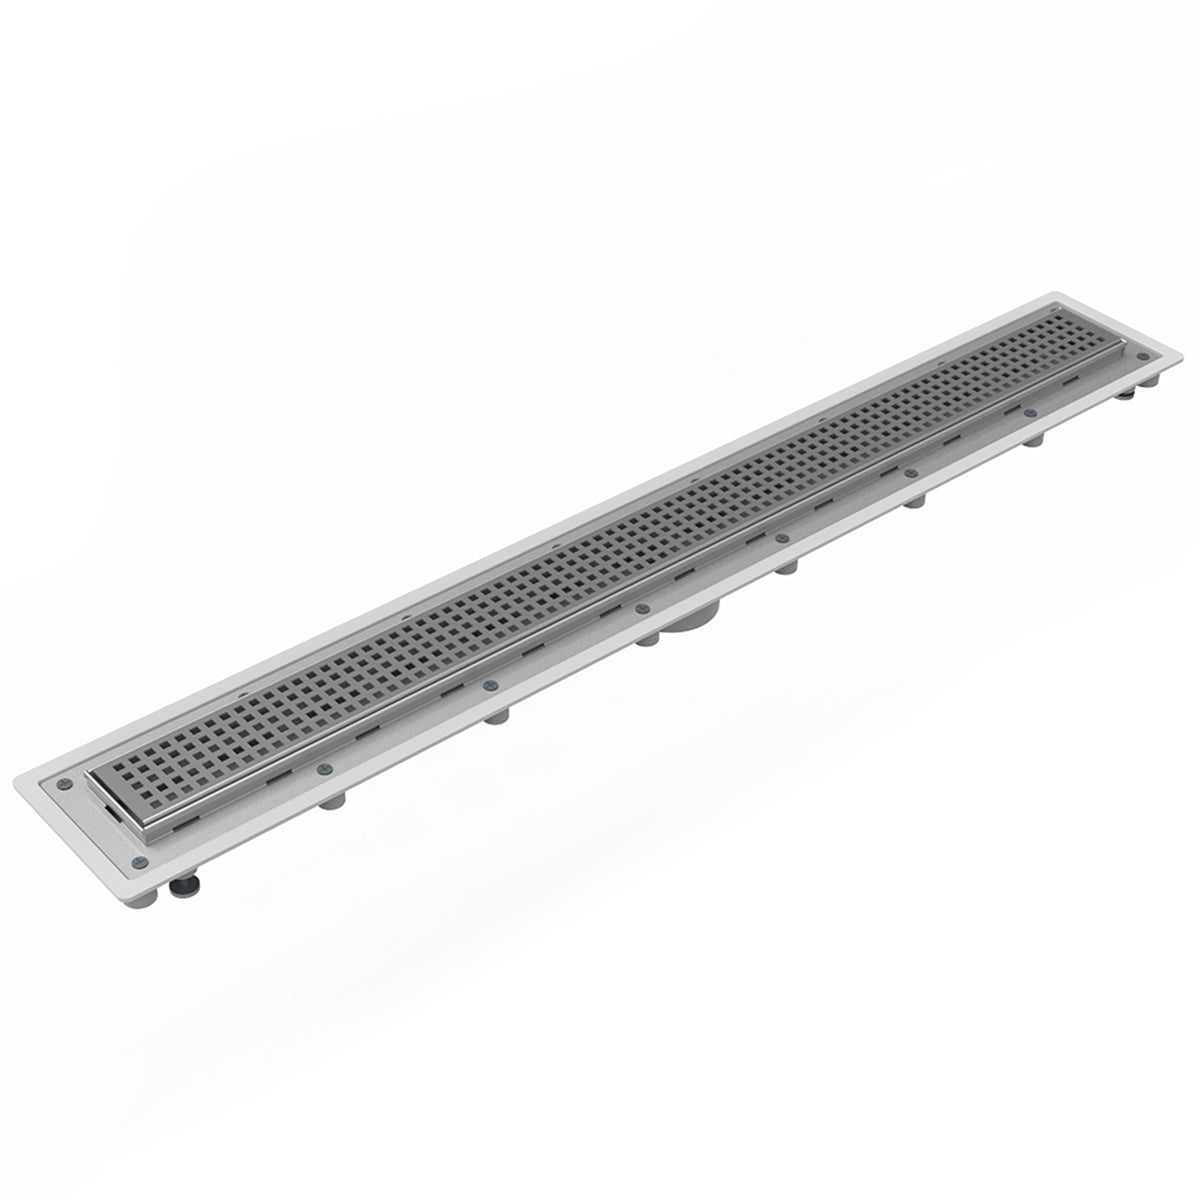 Infinity Drain 32" Universal Infinity Linear Drain Kit with PVC Channel and Squares Pattern Grate